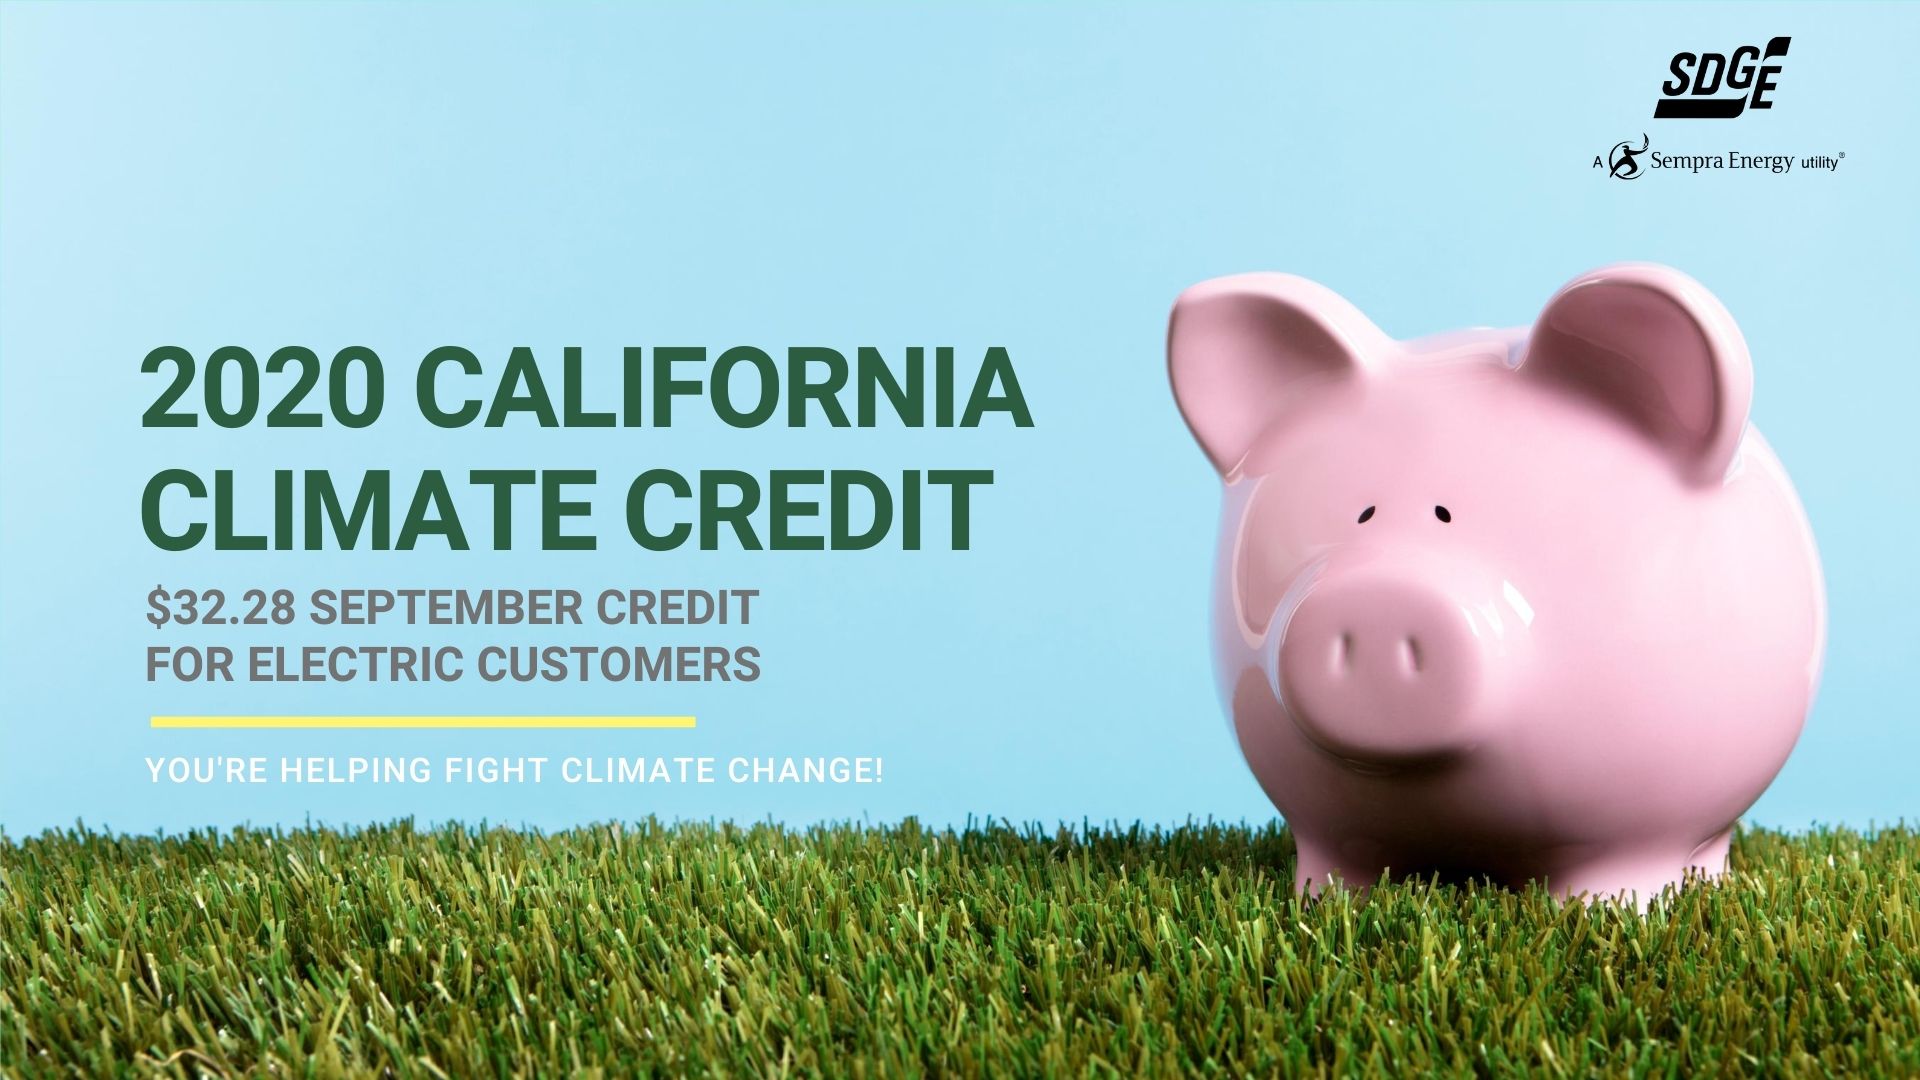 california-climate-credit-to-offset-september-bills-for-sdg-e-electric